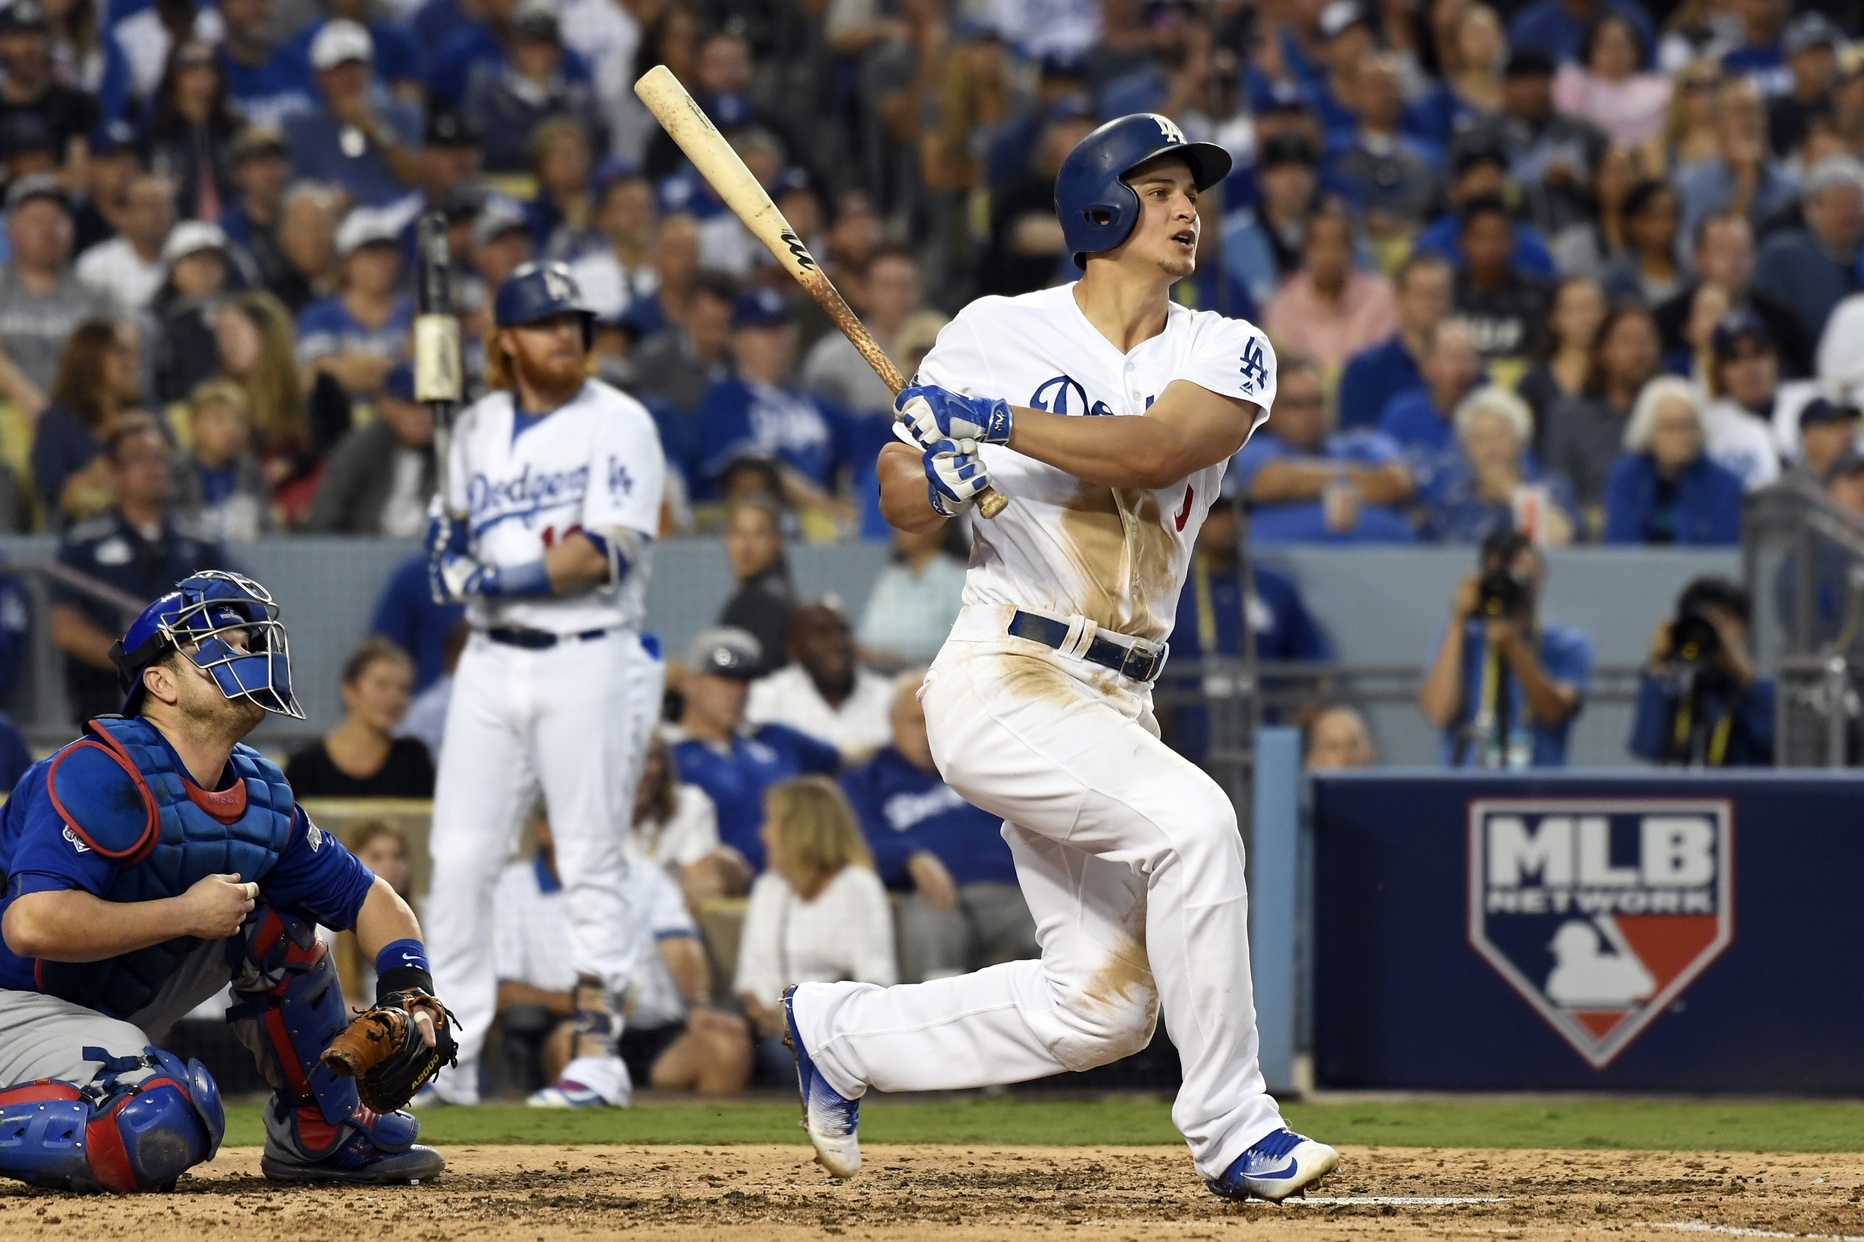 Seager Brothers, Kyle & Corey, Make MLB HR History [VIDEO]